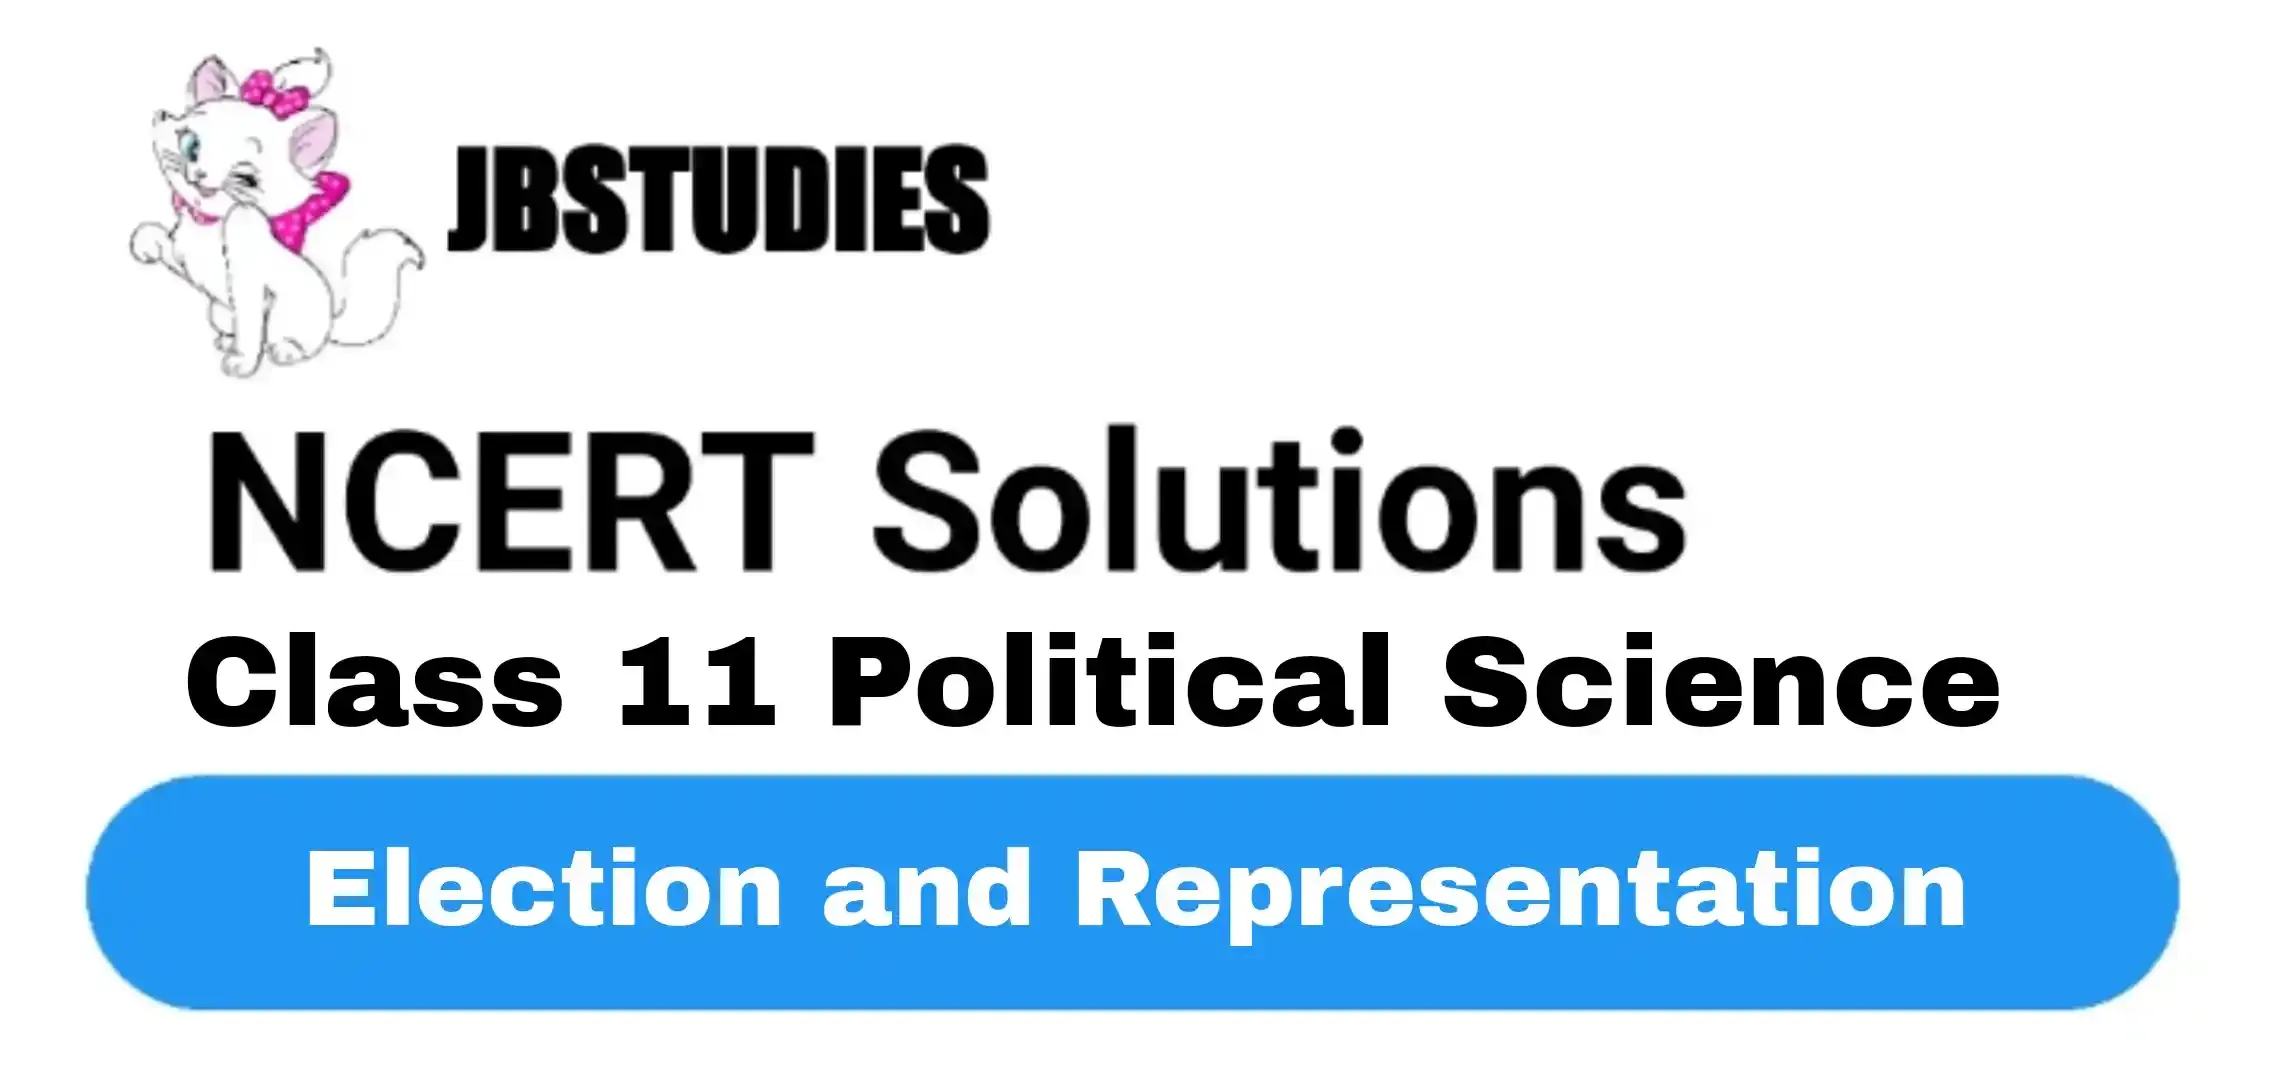 Solutions Class 11 Political Science Chapter-3 Election and Representation